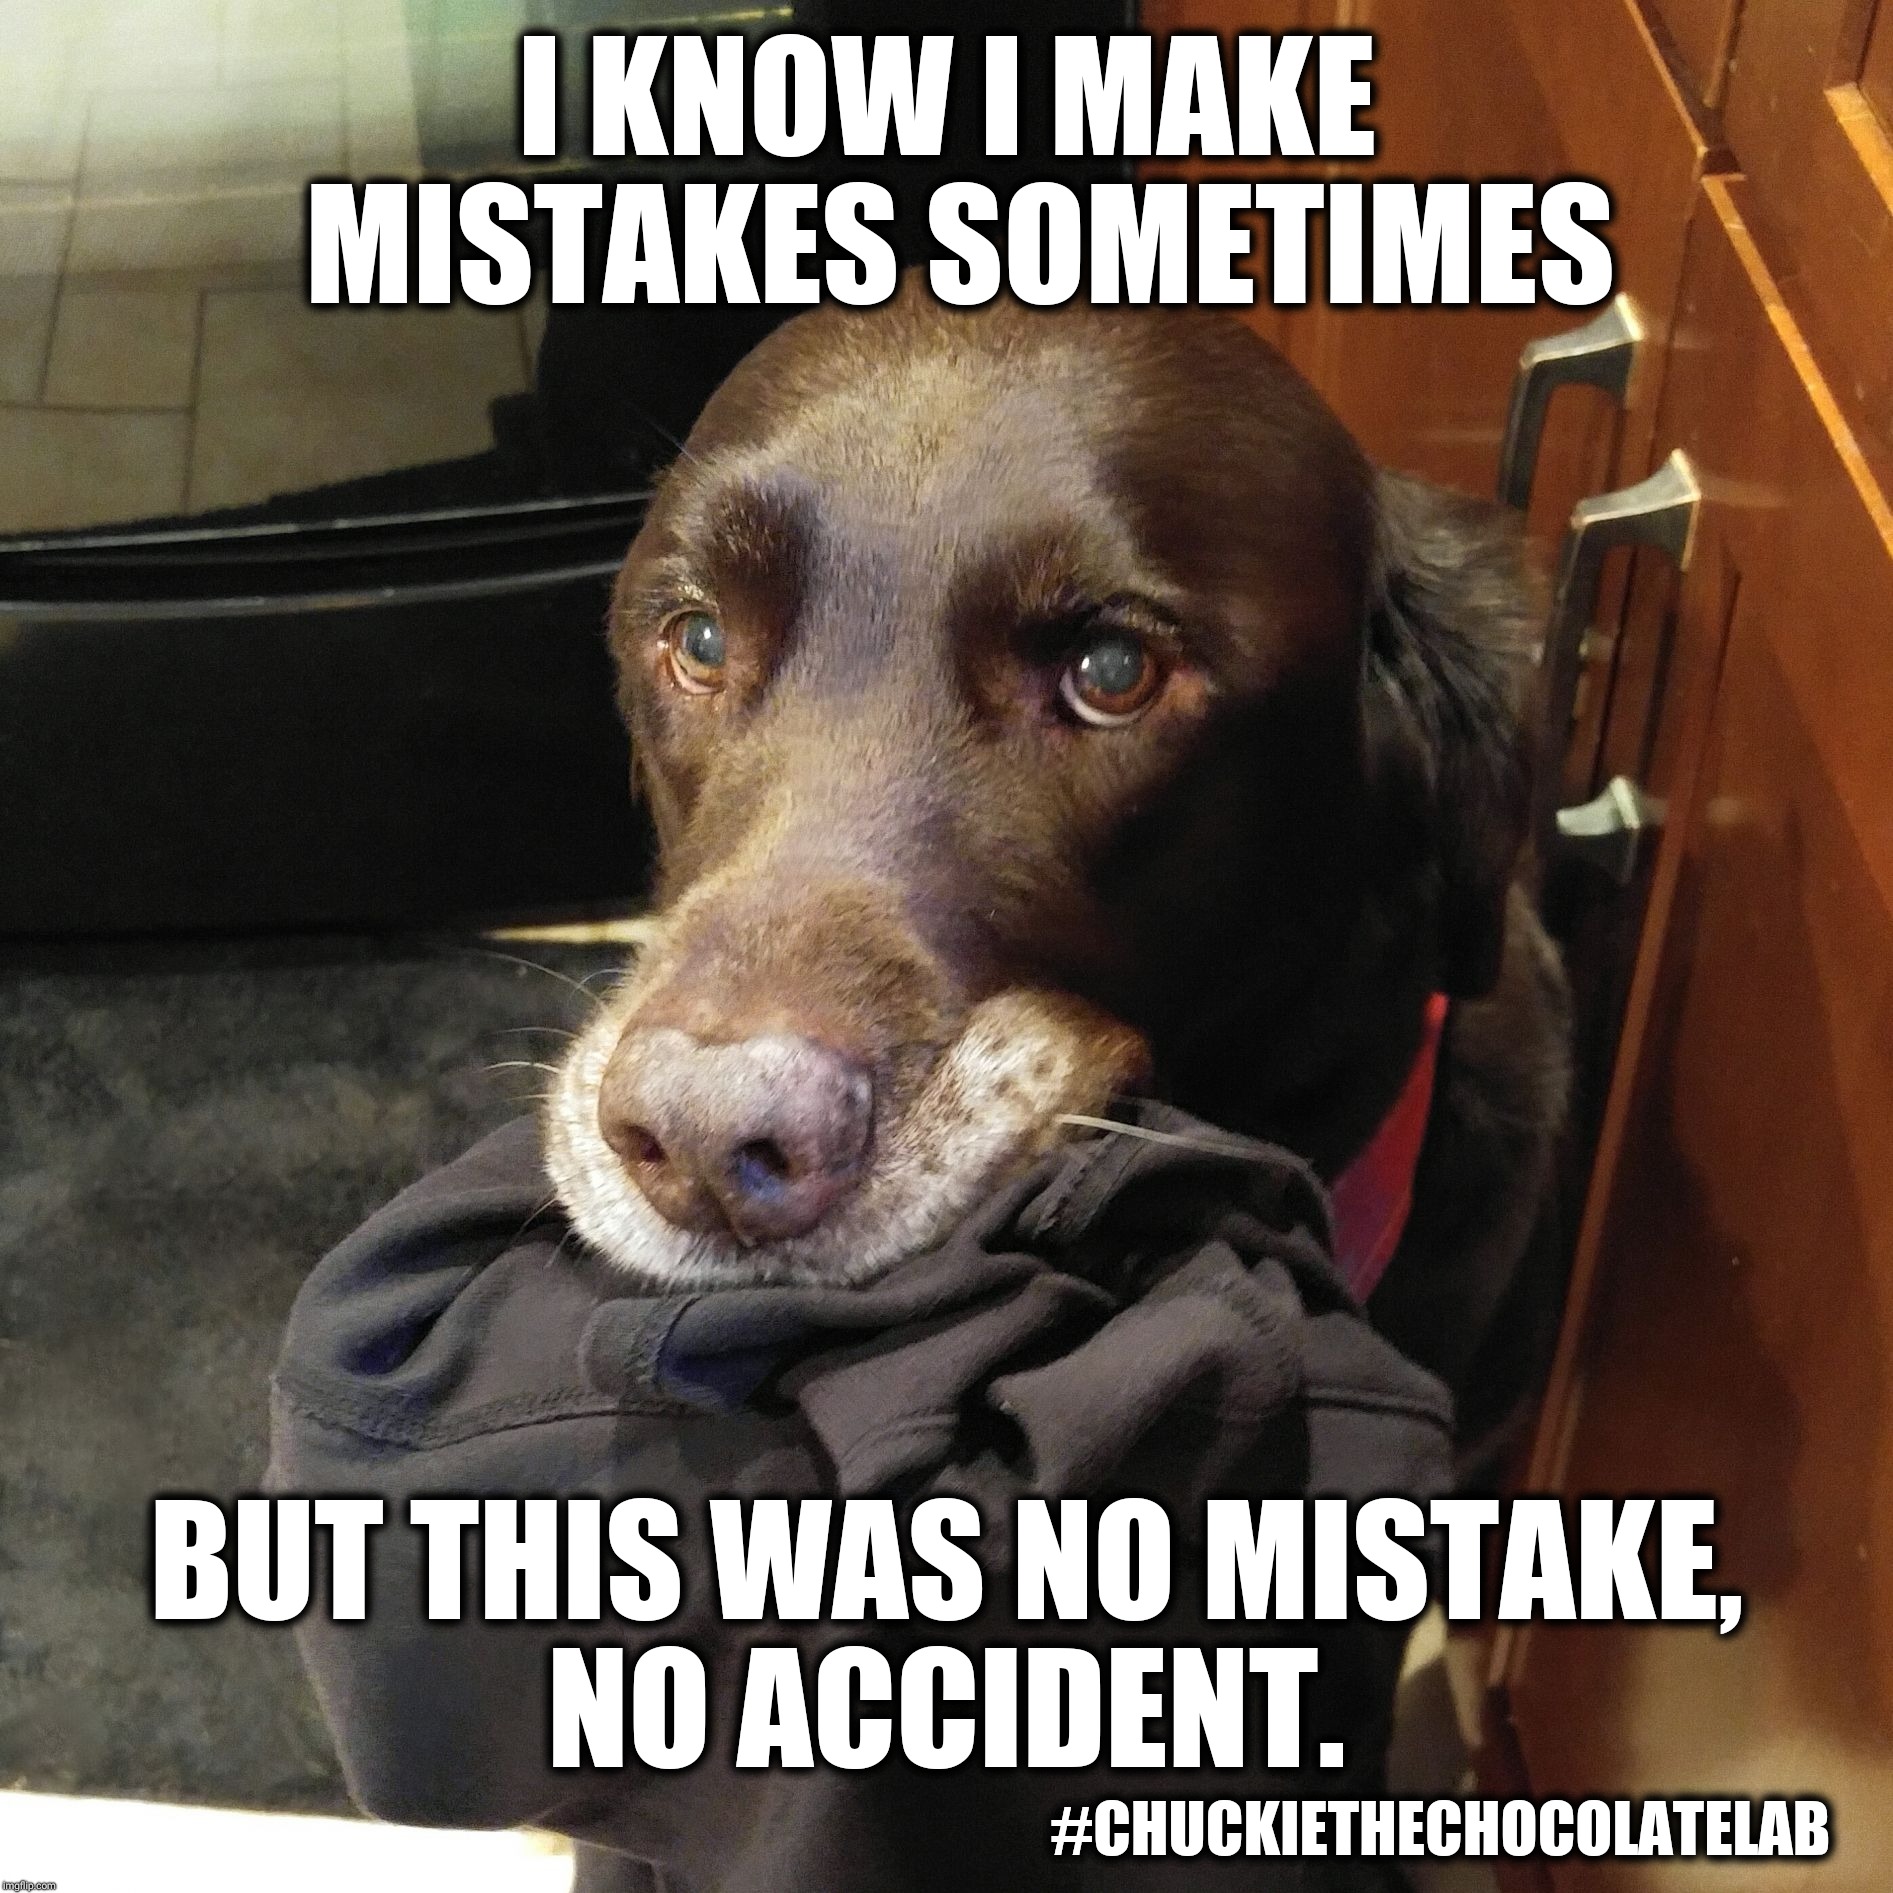 Chuckie Makes Mistakes Sometimes  | I KNOW I MAKE MISTAKES SOMETIMES; BUT THIS WAS NO MISTAKE, NO ACCIDENT. #CHUCKIETHECHOCOLATELAB | image tagged in chuckie the chocolate lab teamchuckie,chuckie makes mistakes sometimes,dogs,funny,memes,cute | made w/ Imgflip meme maker